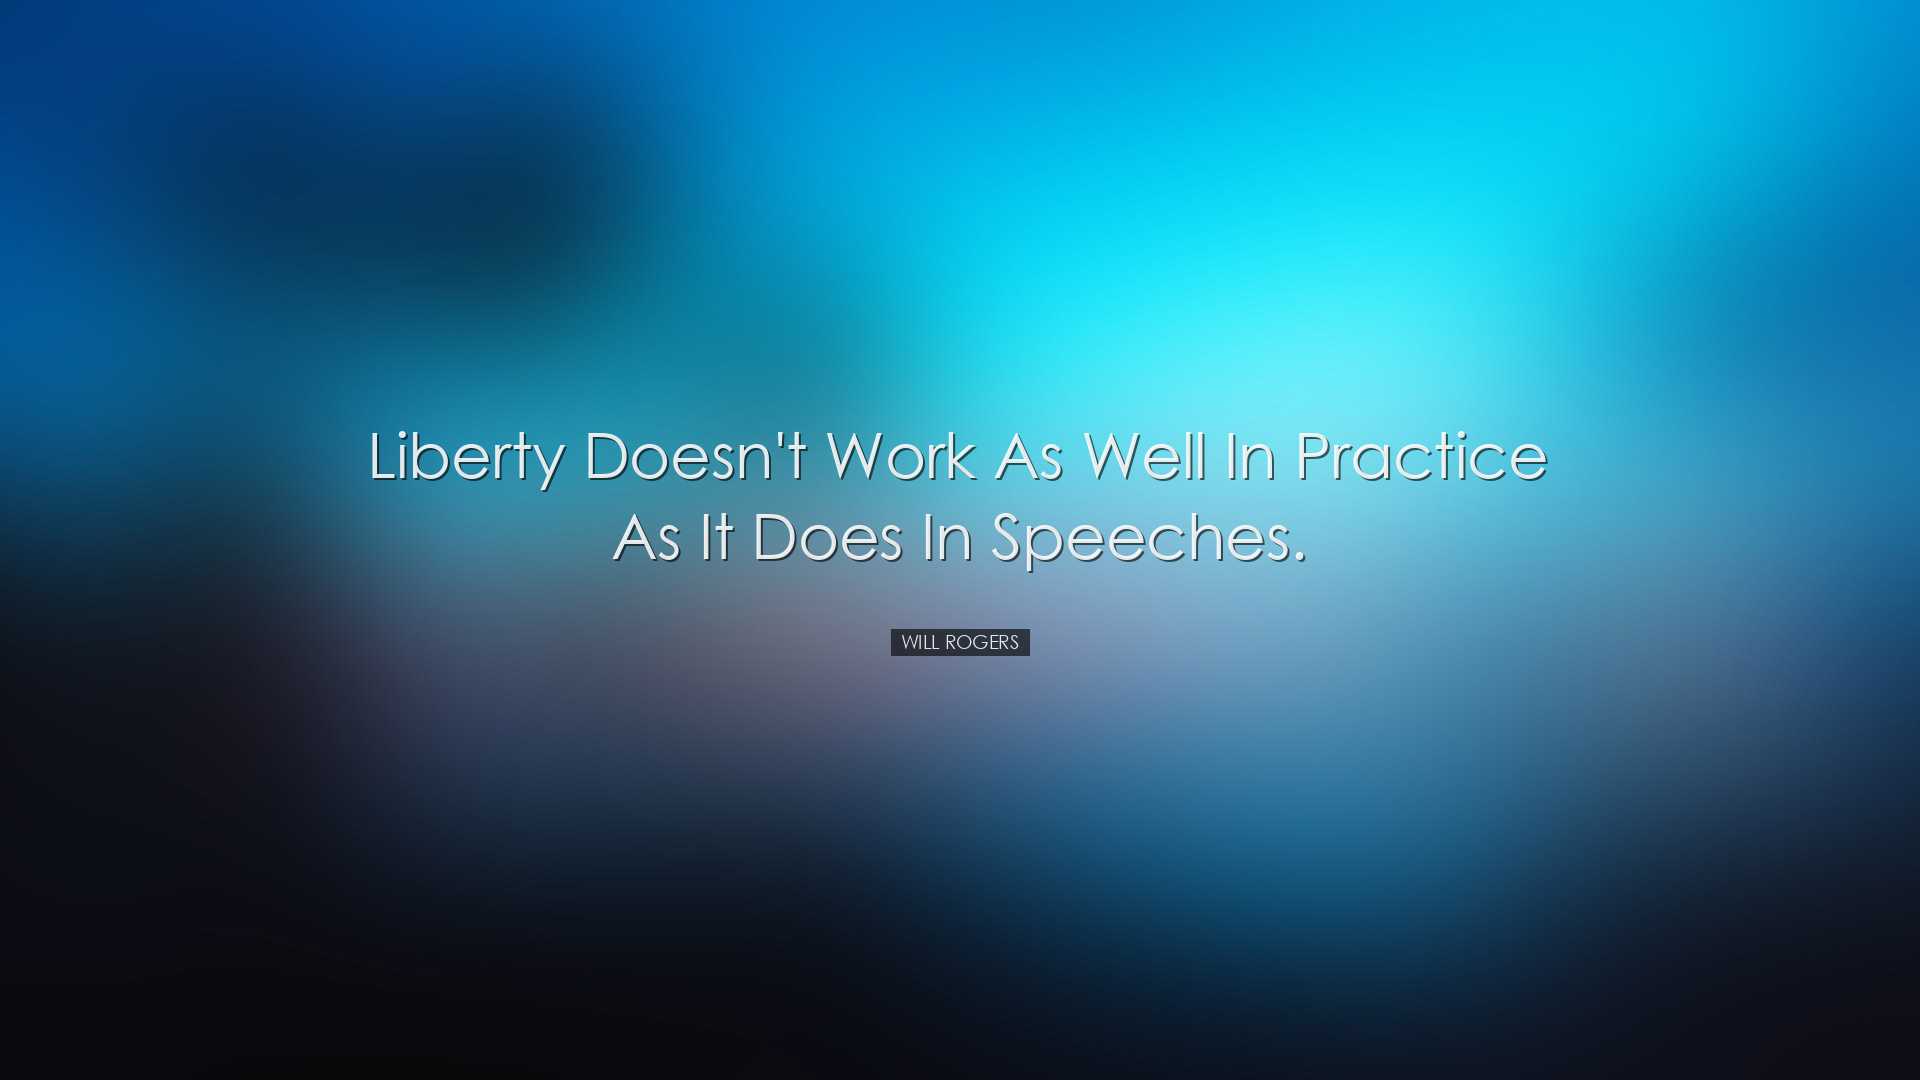 Liberty doesn't work as well in practice as it does in speeches. -